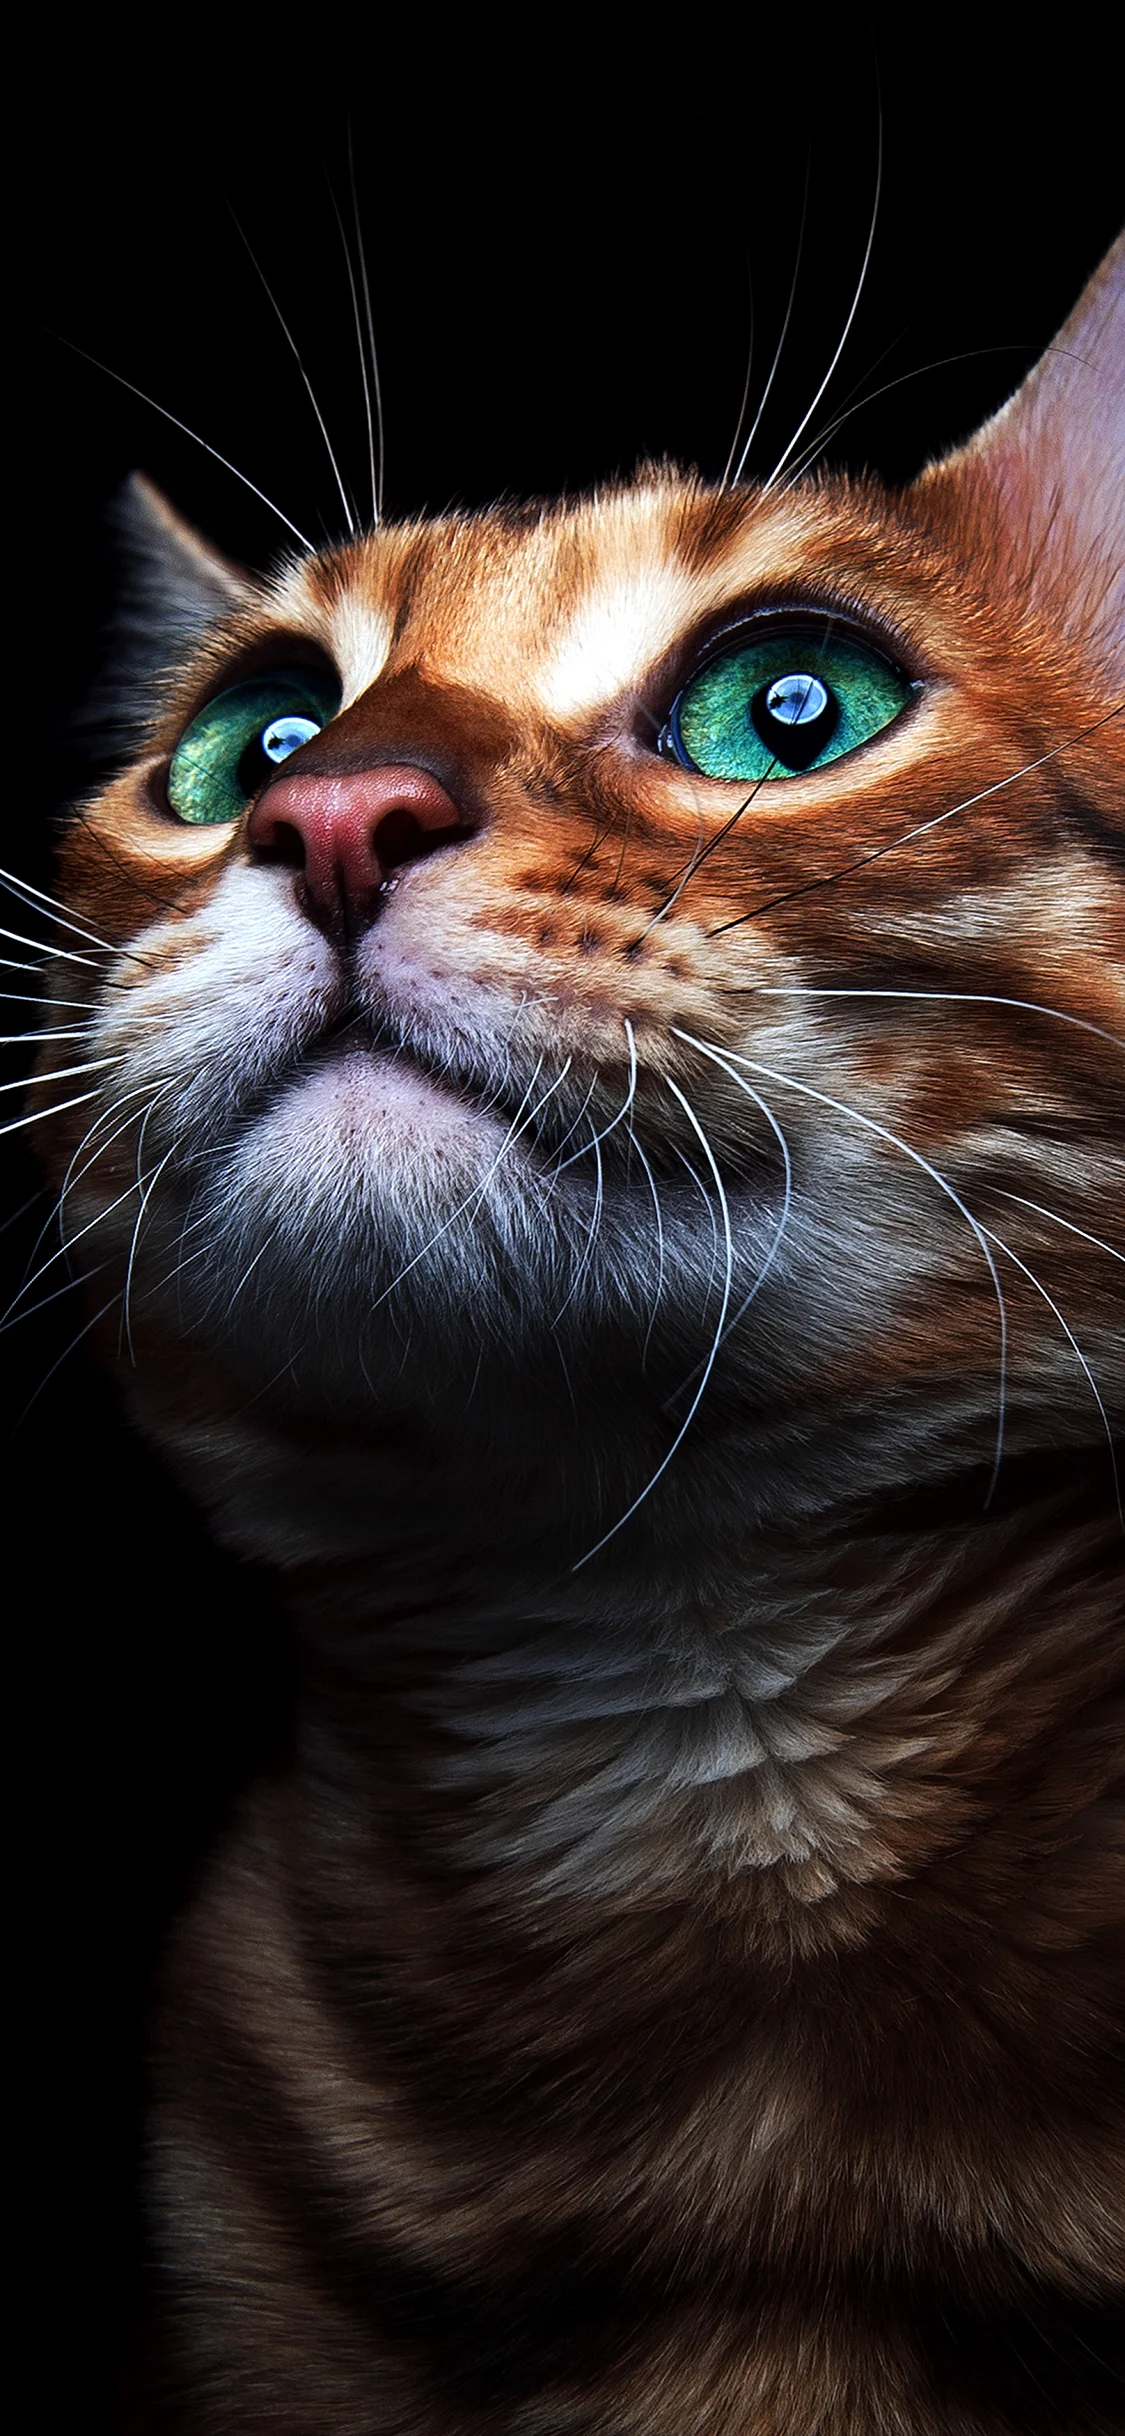 Cat Wallpaper for iPhone 11 Pro